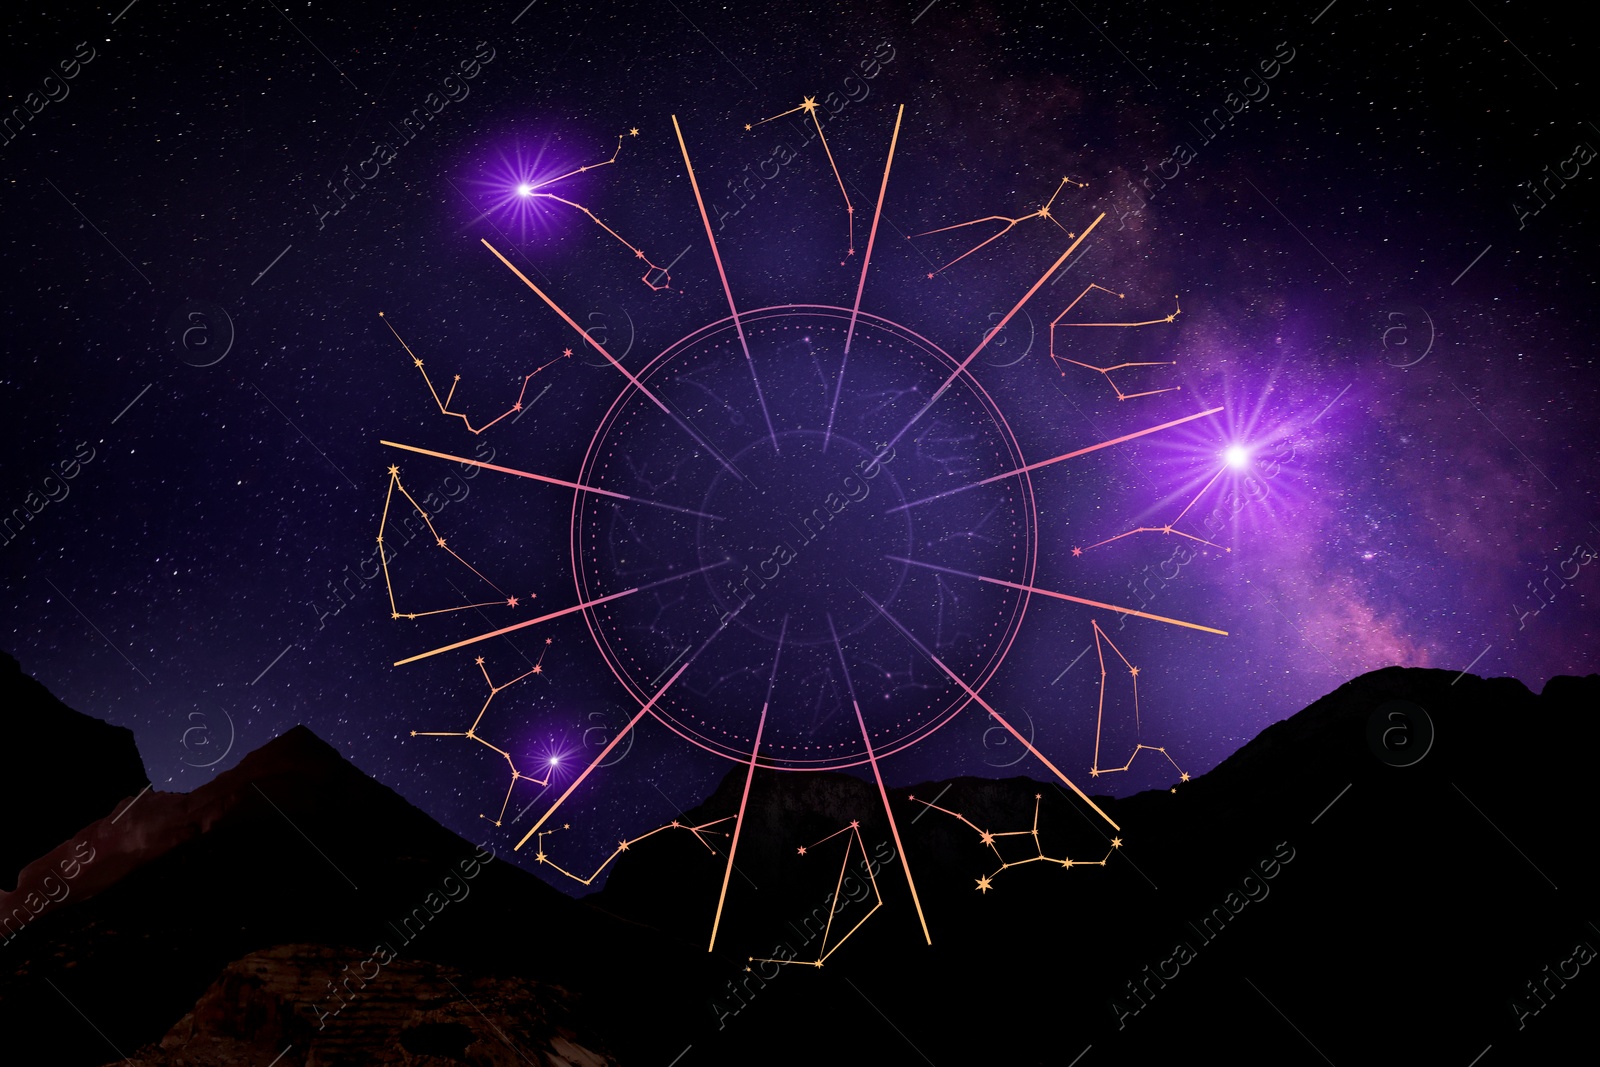 Image of Zodiac wheel on mountain landscape with starry sky as background. Horoscopic astrology